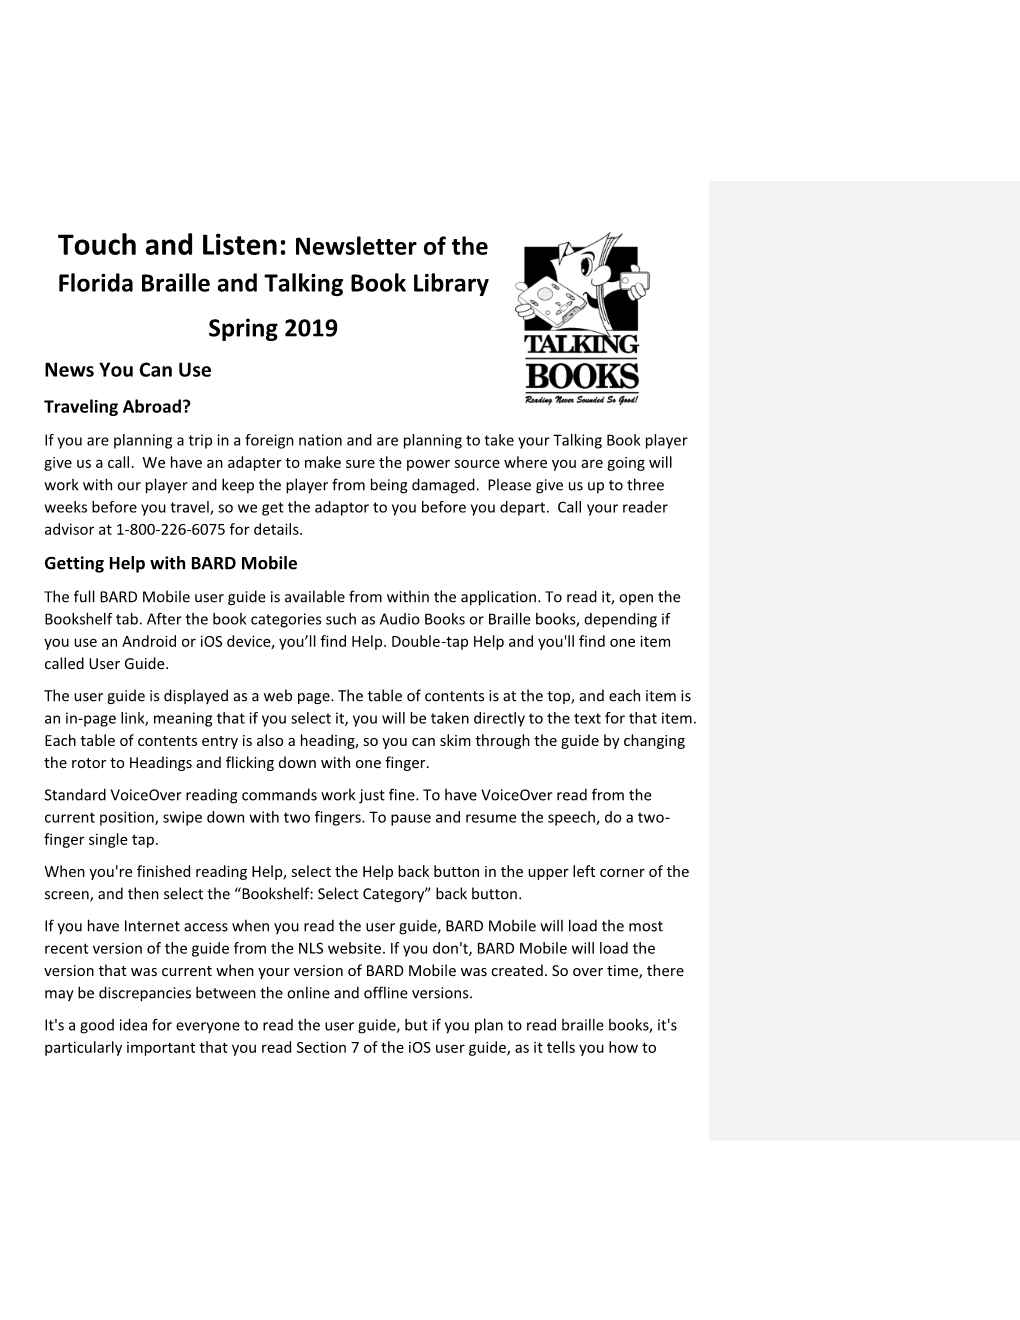 Touch and Listen: Newsletter of the Florida Braille and Talking Book